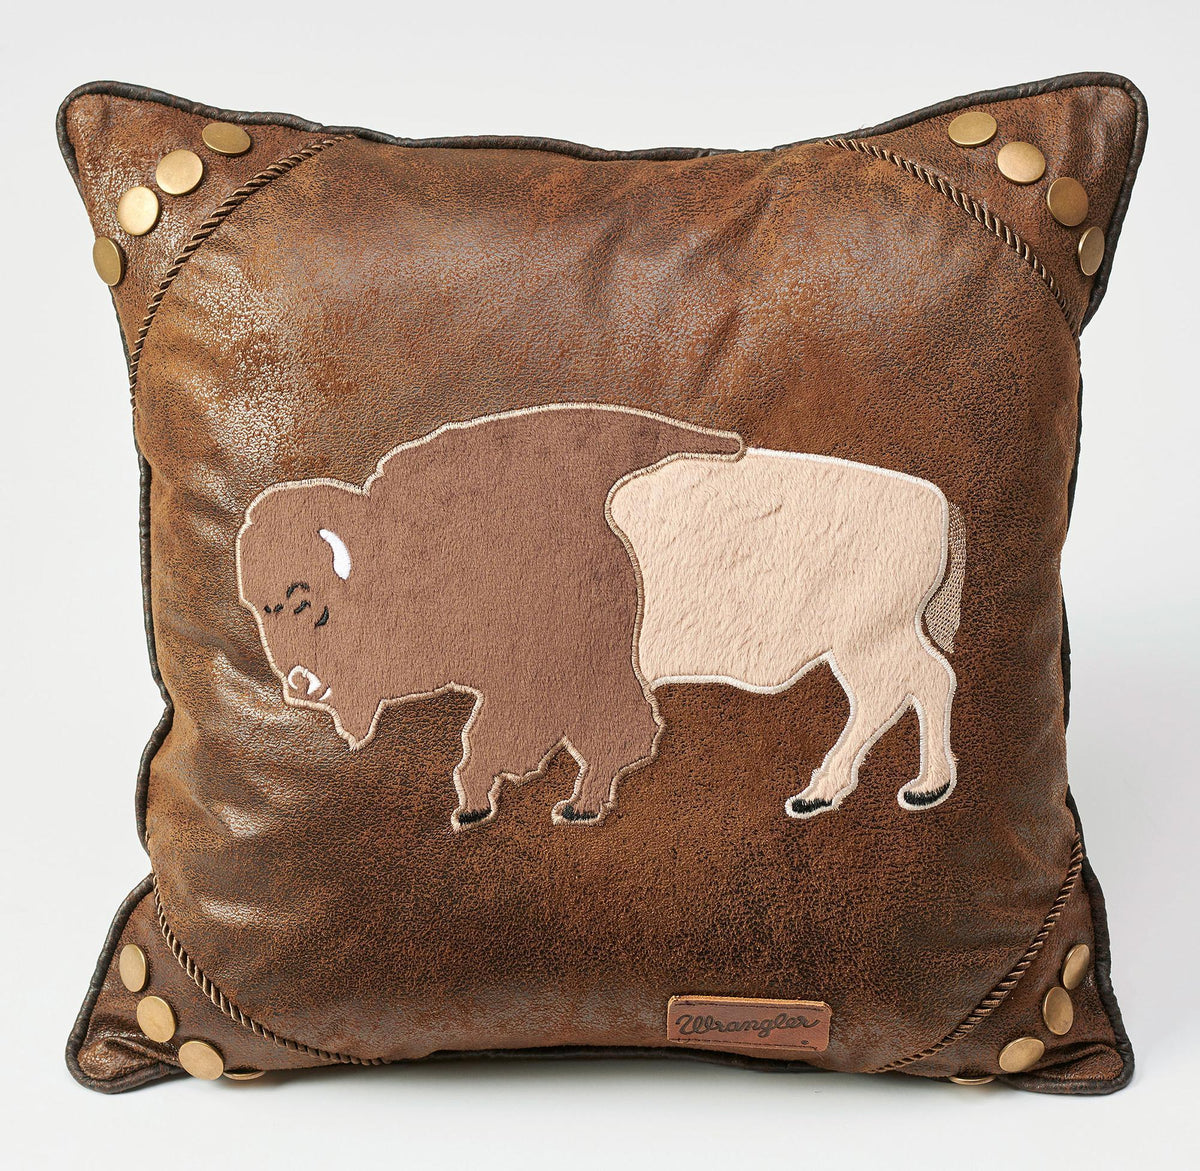 High Plains Bison Pillow - Wild Wings